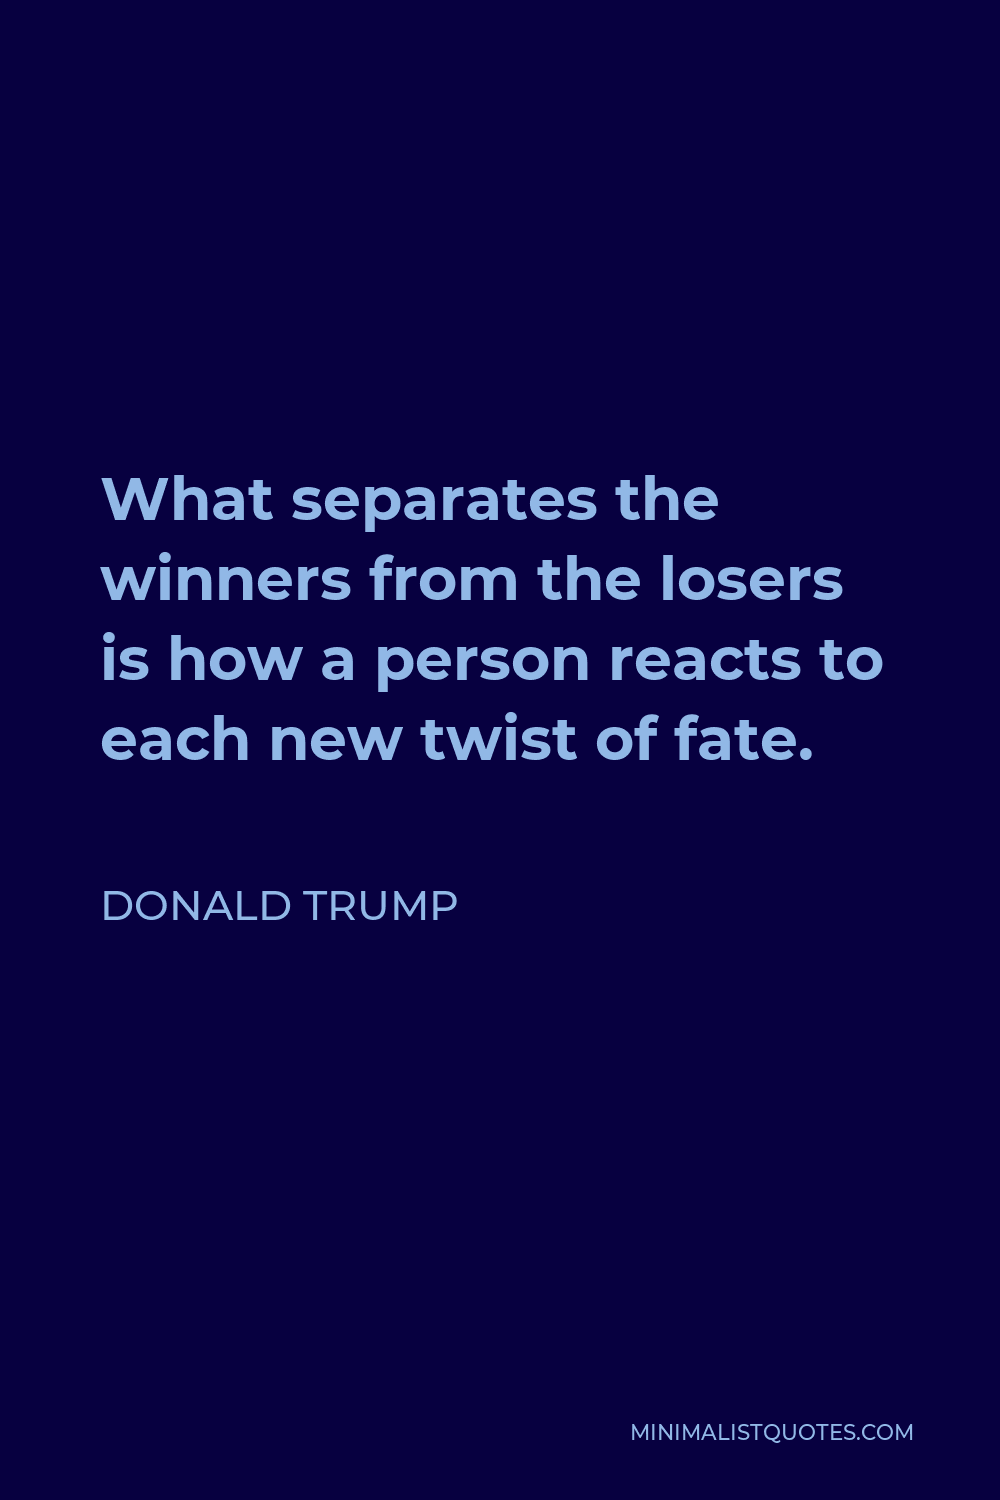 Donald Trump Quote - What separates the winners from the losers is how a person reacts to each new twist of fate.